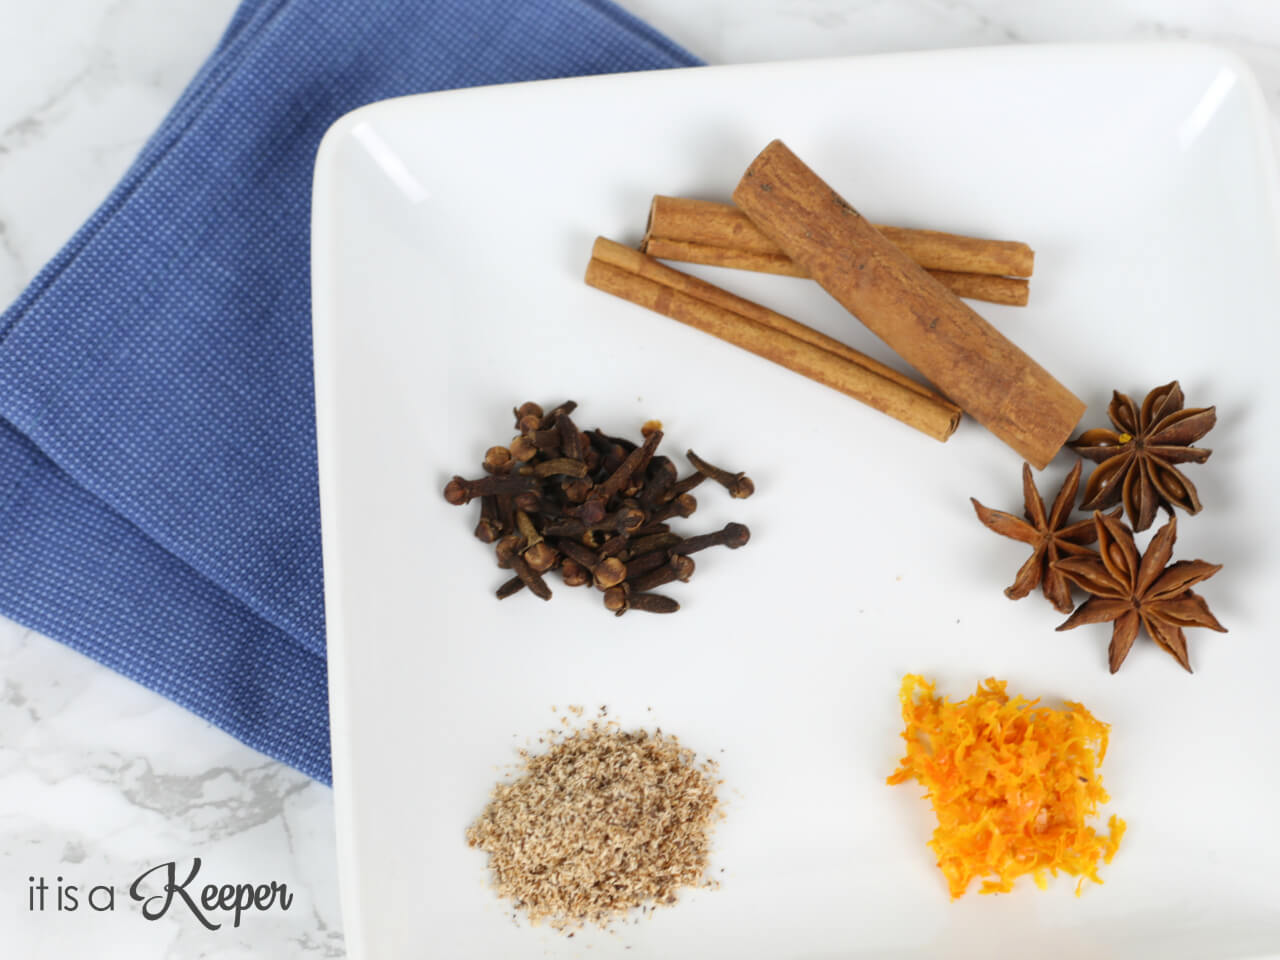 Homemade Kitchen Spice Air Freshener - this easy natural air freshener can be made in minutes and have your house smelling amazing in no time